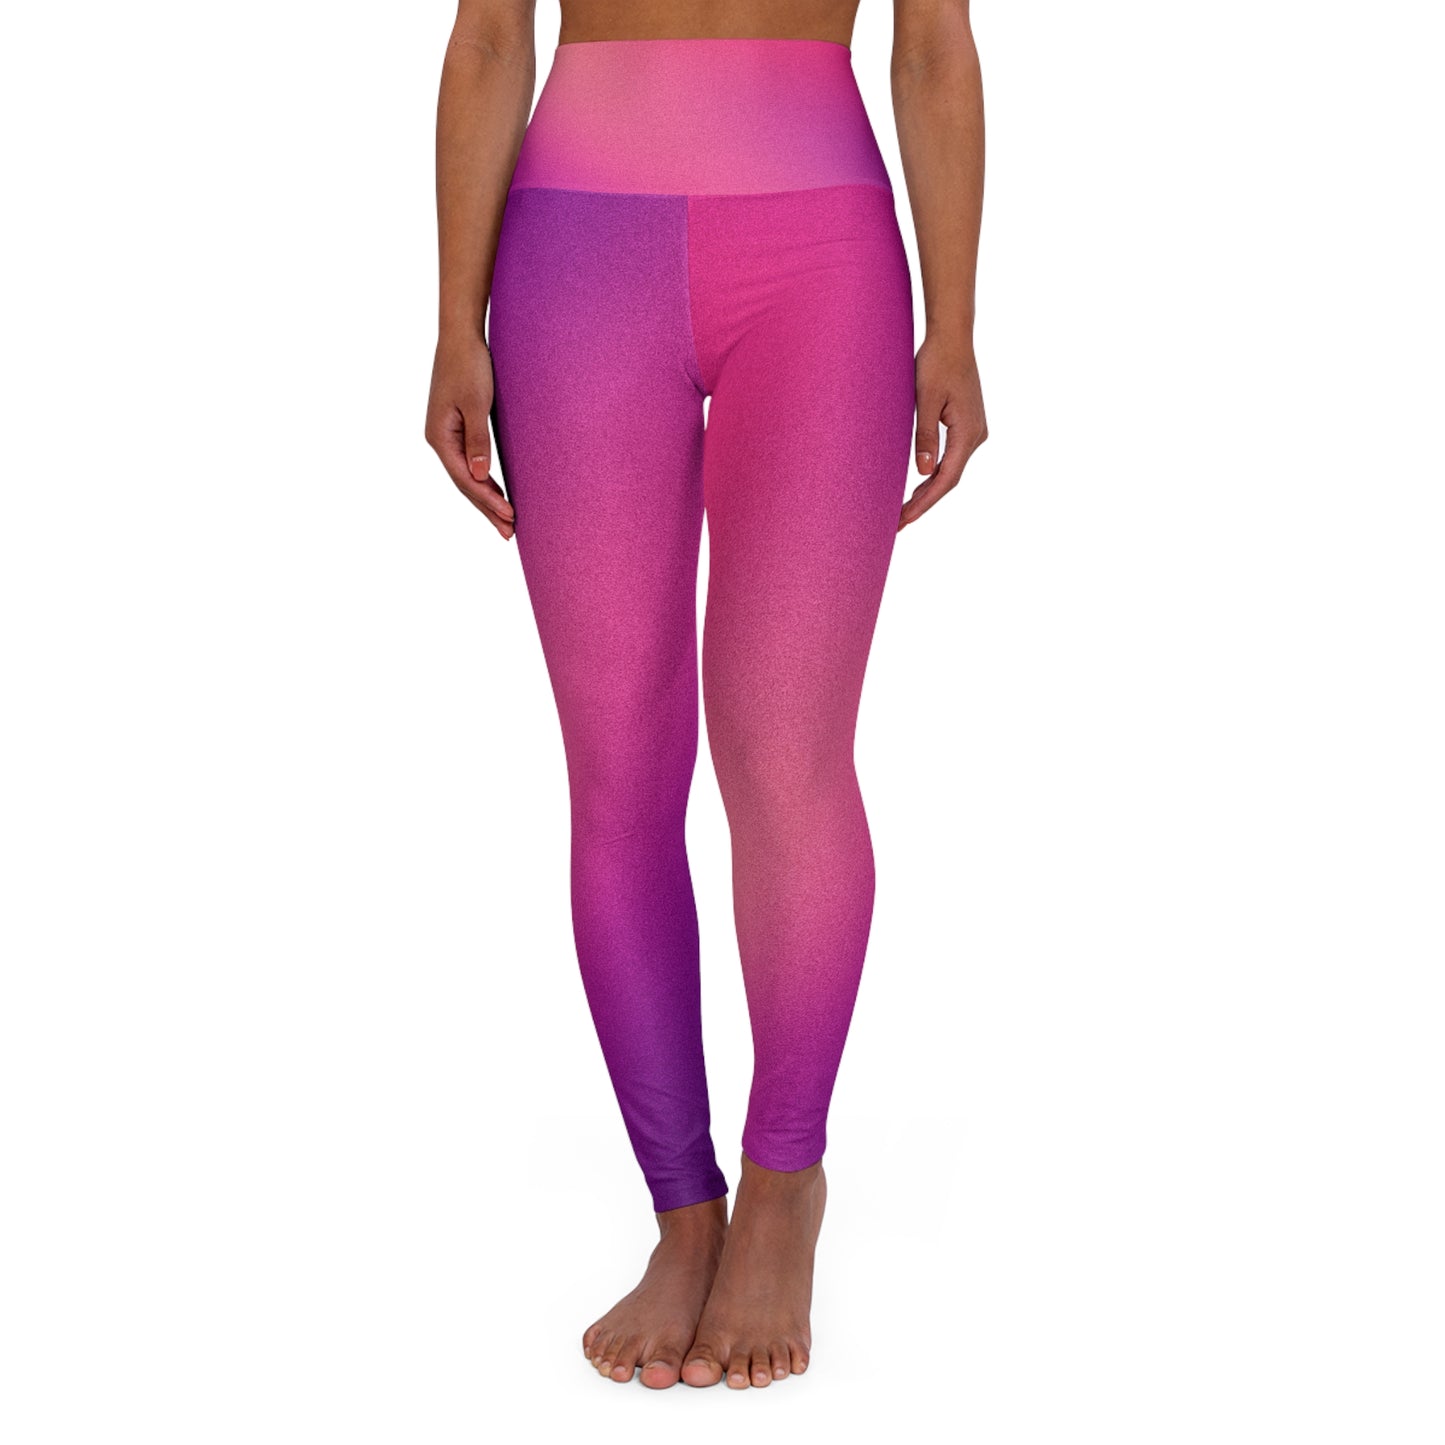 Fuschia Rainbow Slide Artistic Abstract Skinny Fit High Waisted Yoga Leggings, Expertly Crafted in the USA